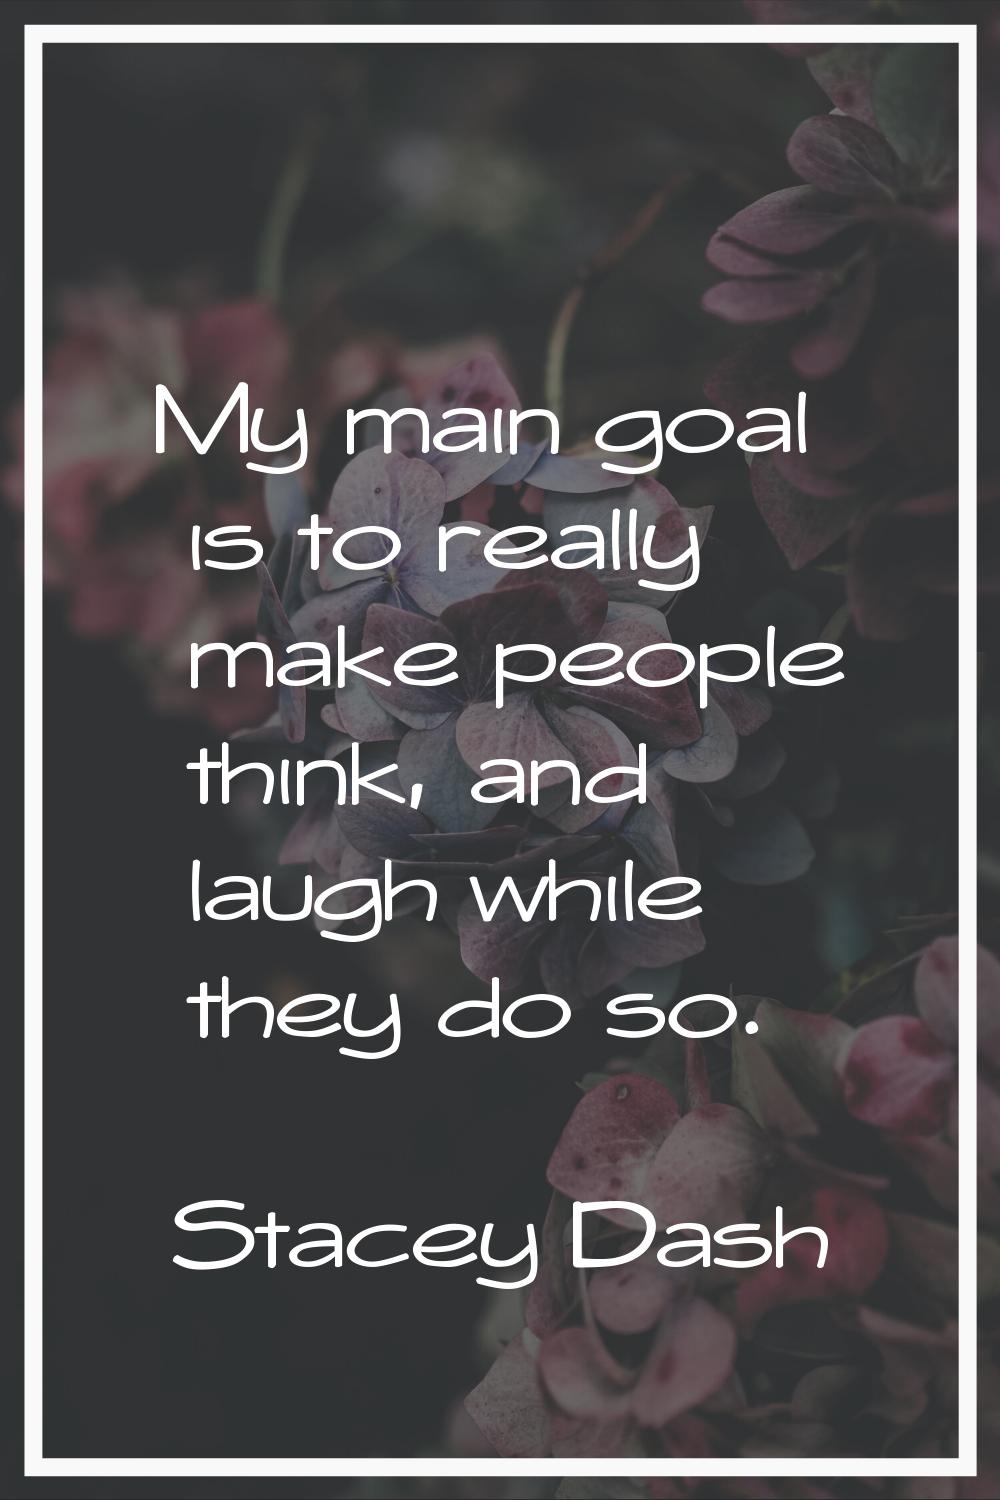 My main goal is to really make people think, and laugh while they do so.